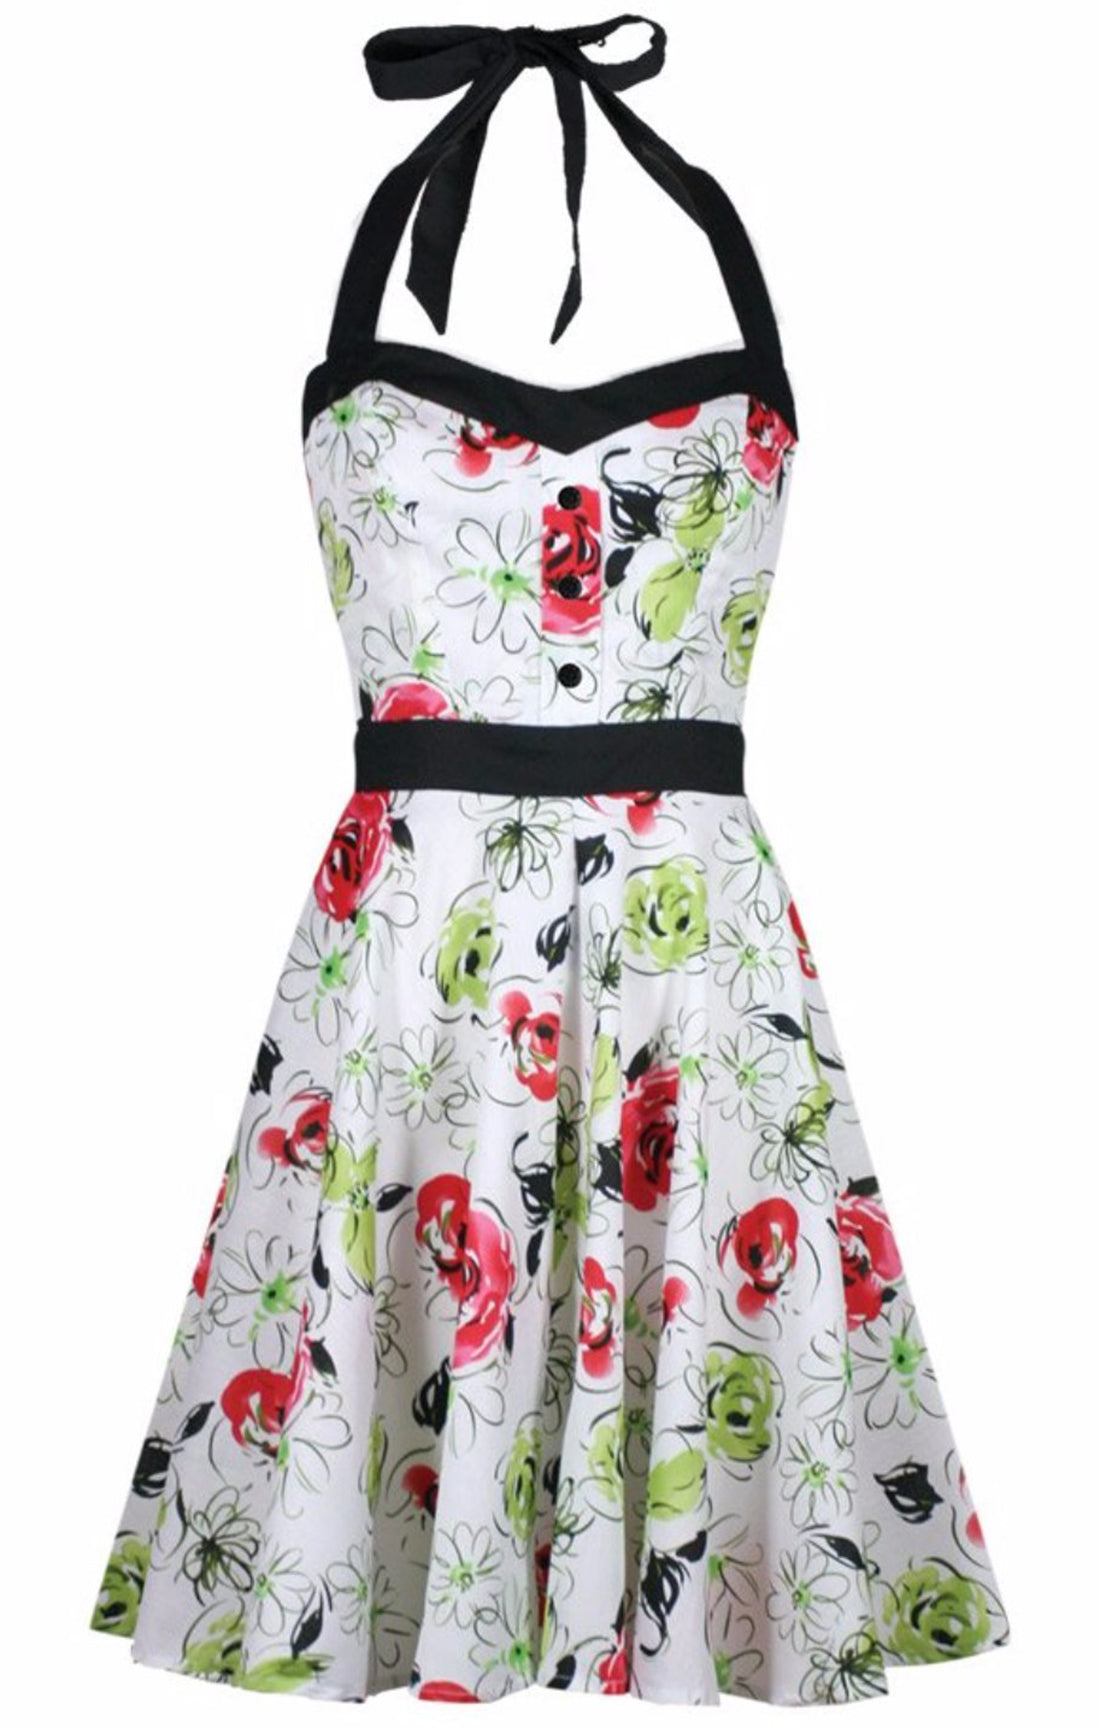 The SUNNY Floral Halter Swing Dress